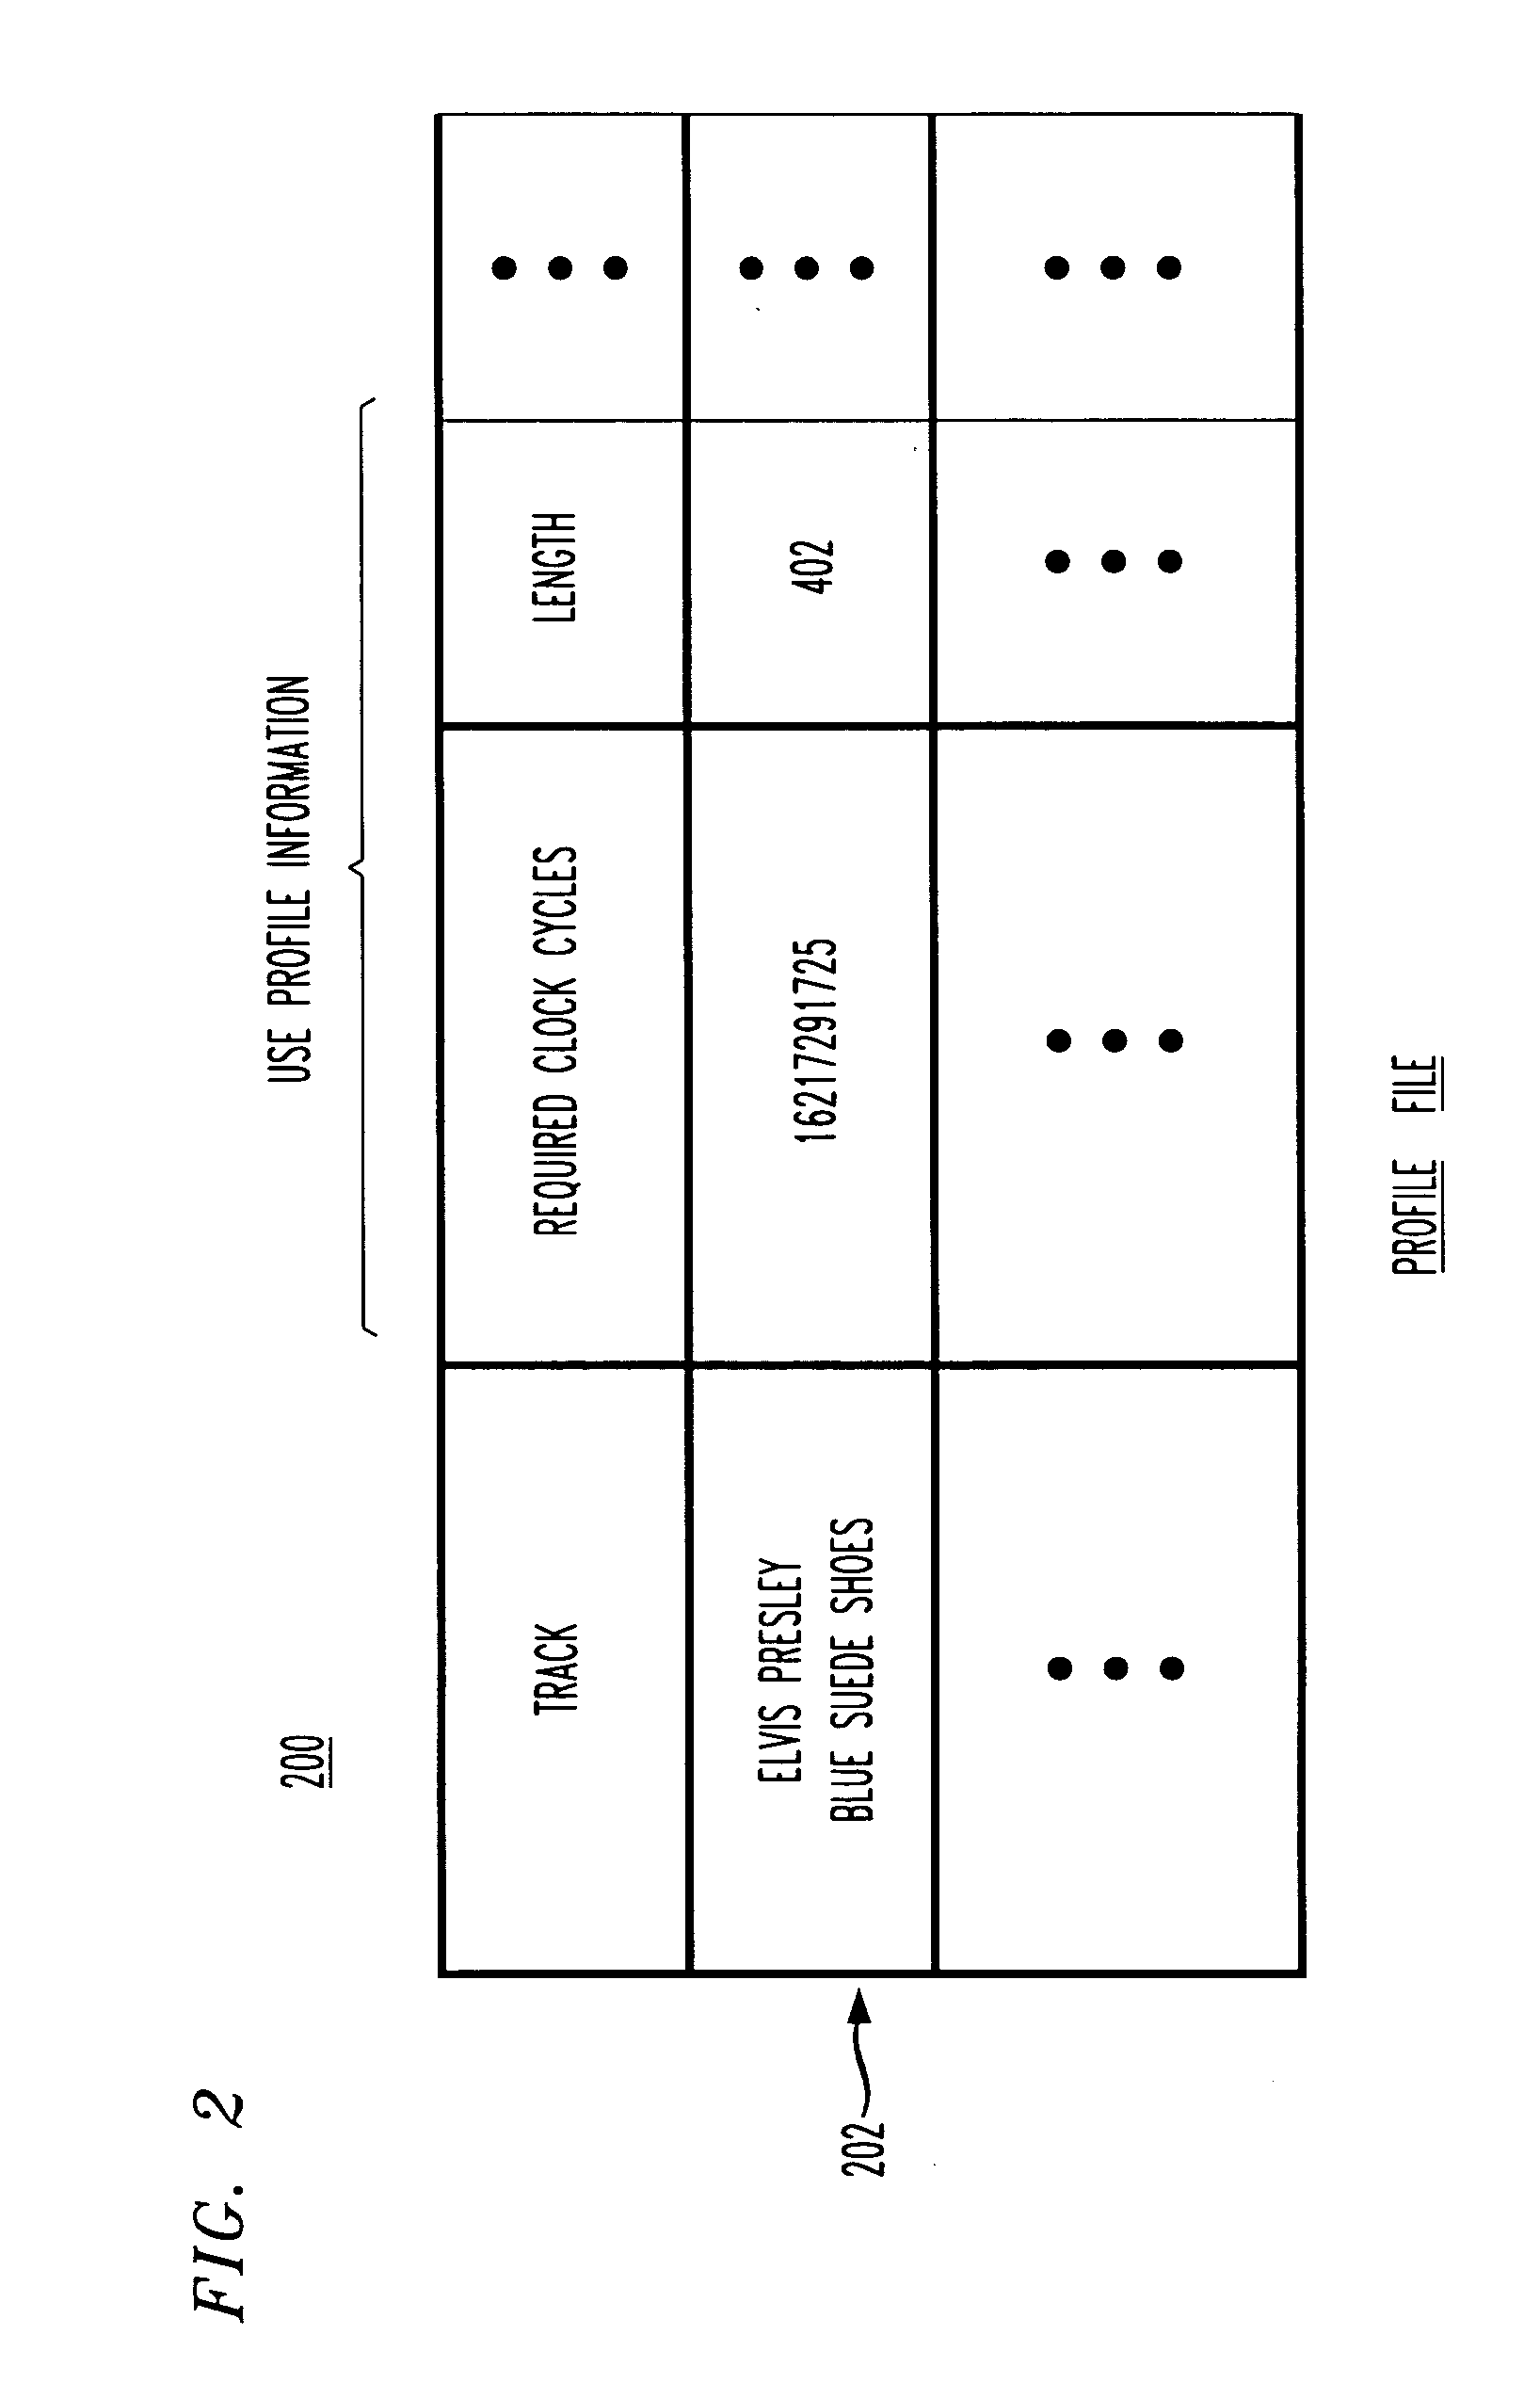 Adaptive power management in portable entertainment device